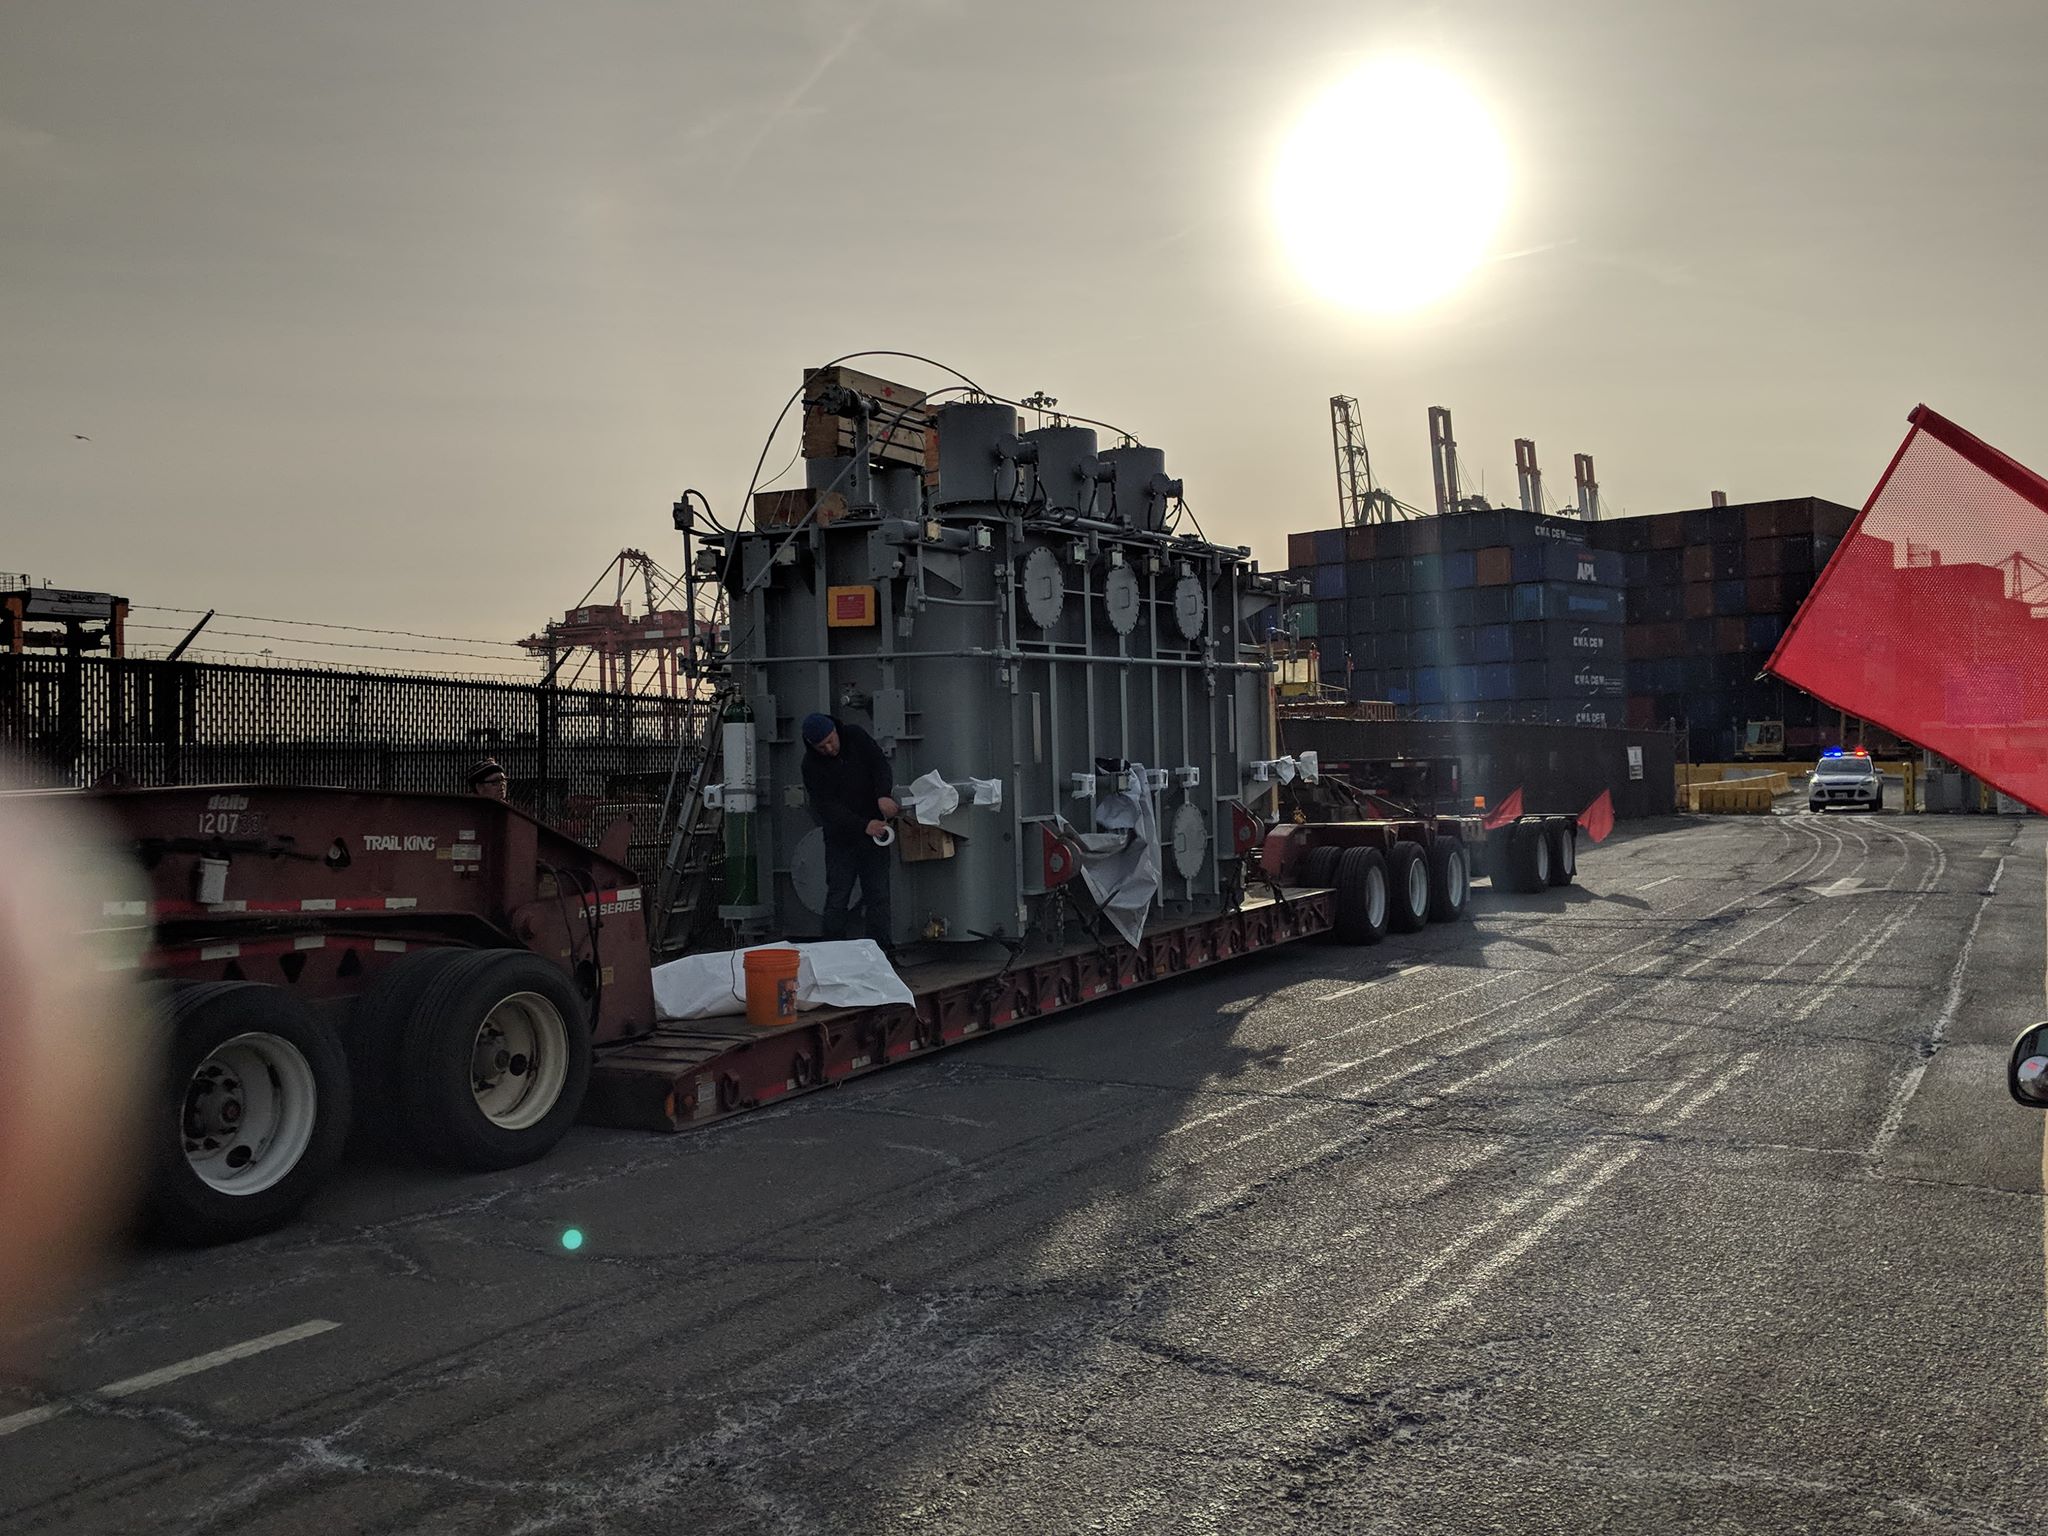 Electrical Transformer Fresh off the Boat from Israel going from Elizabeth Seaport to Minnesota